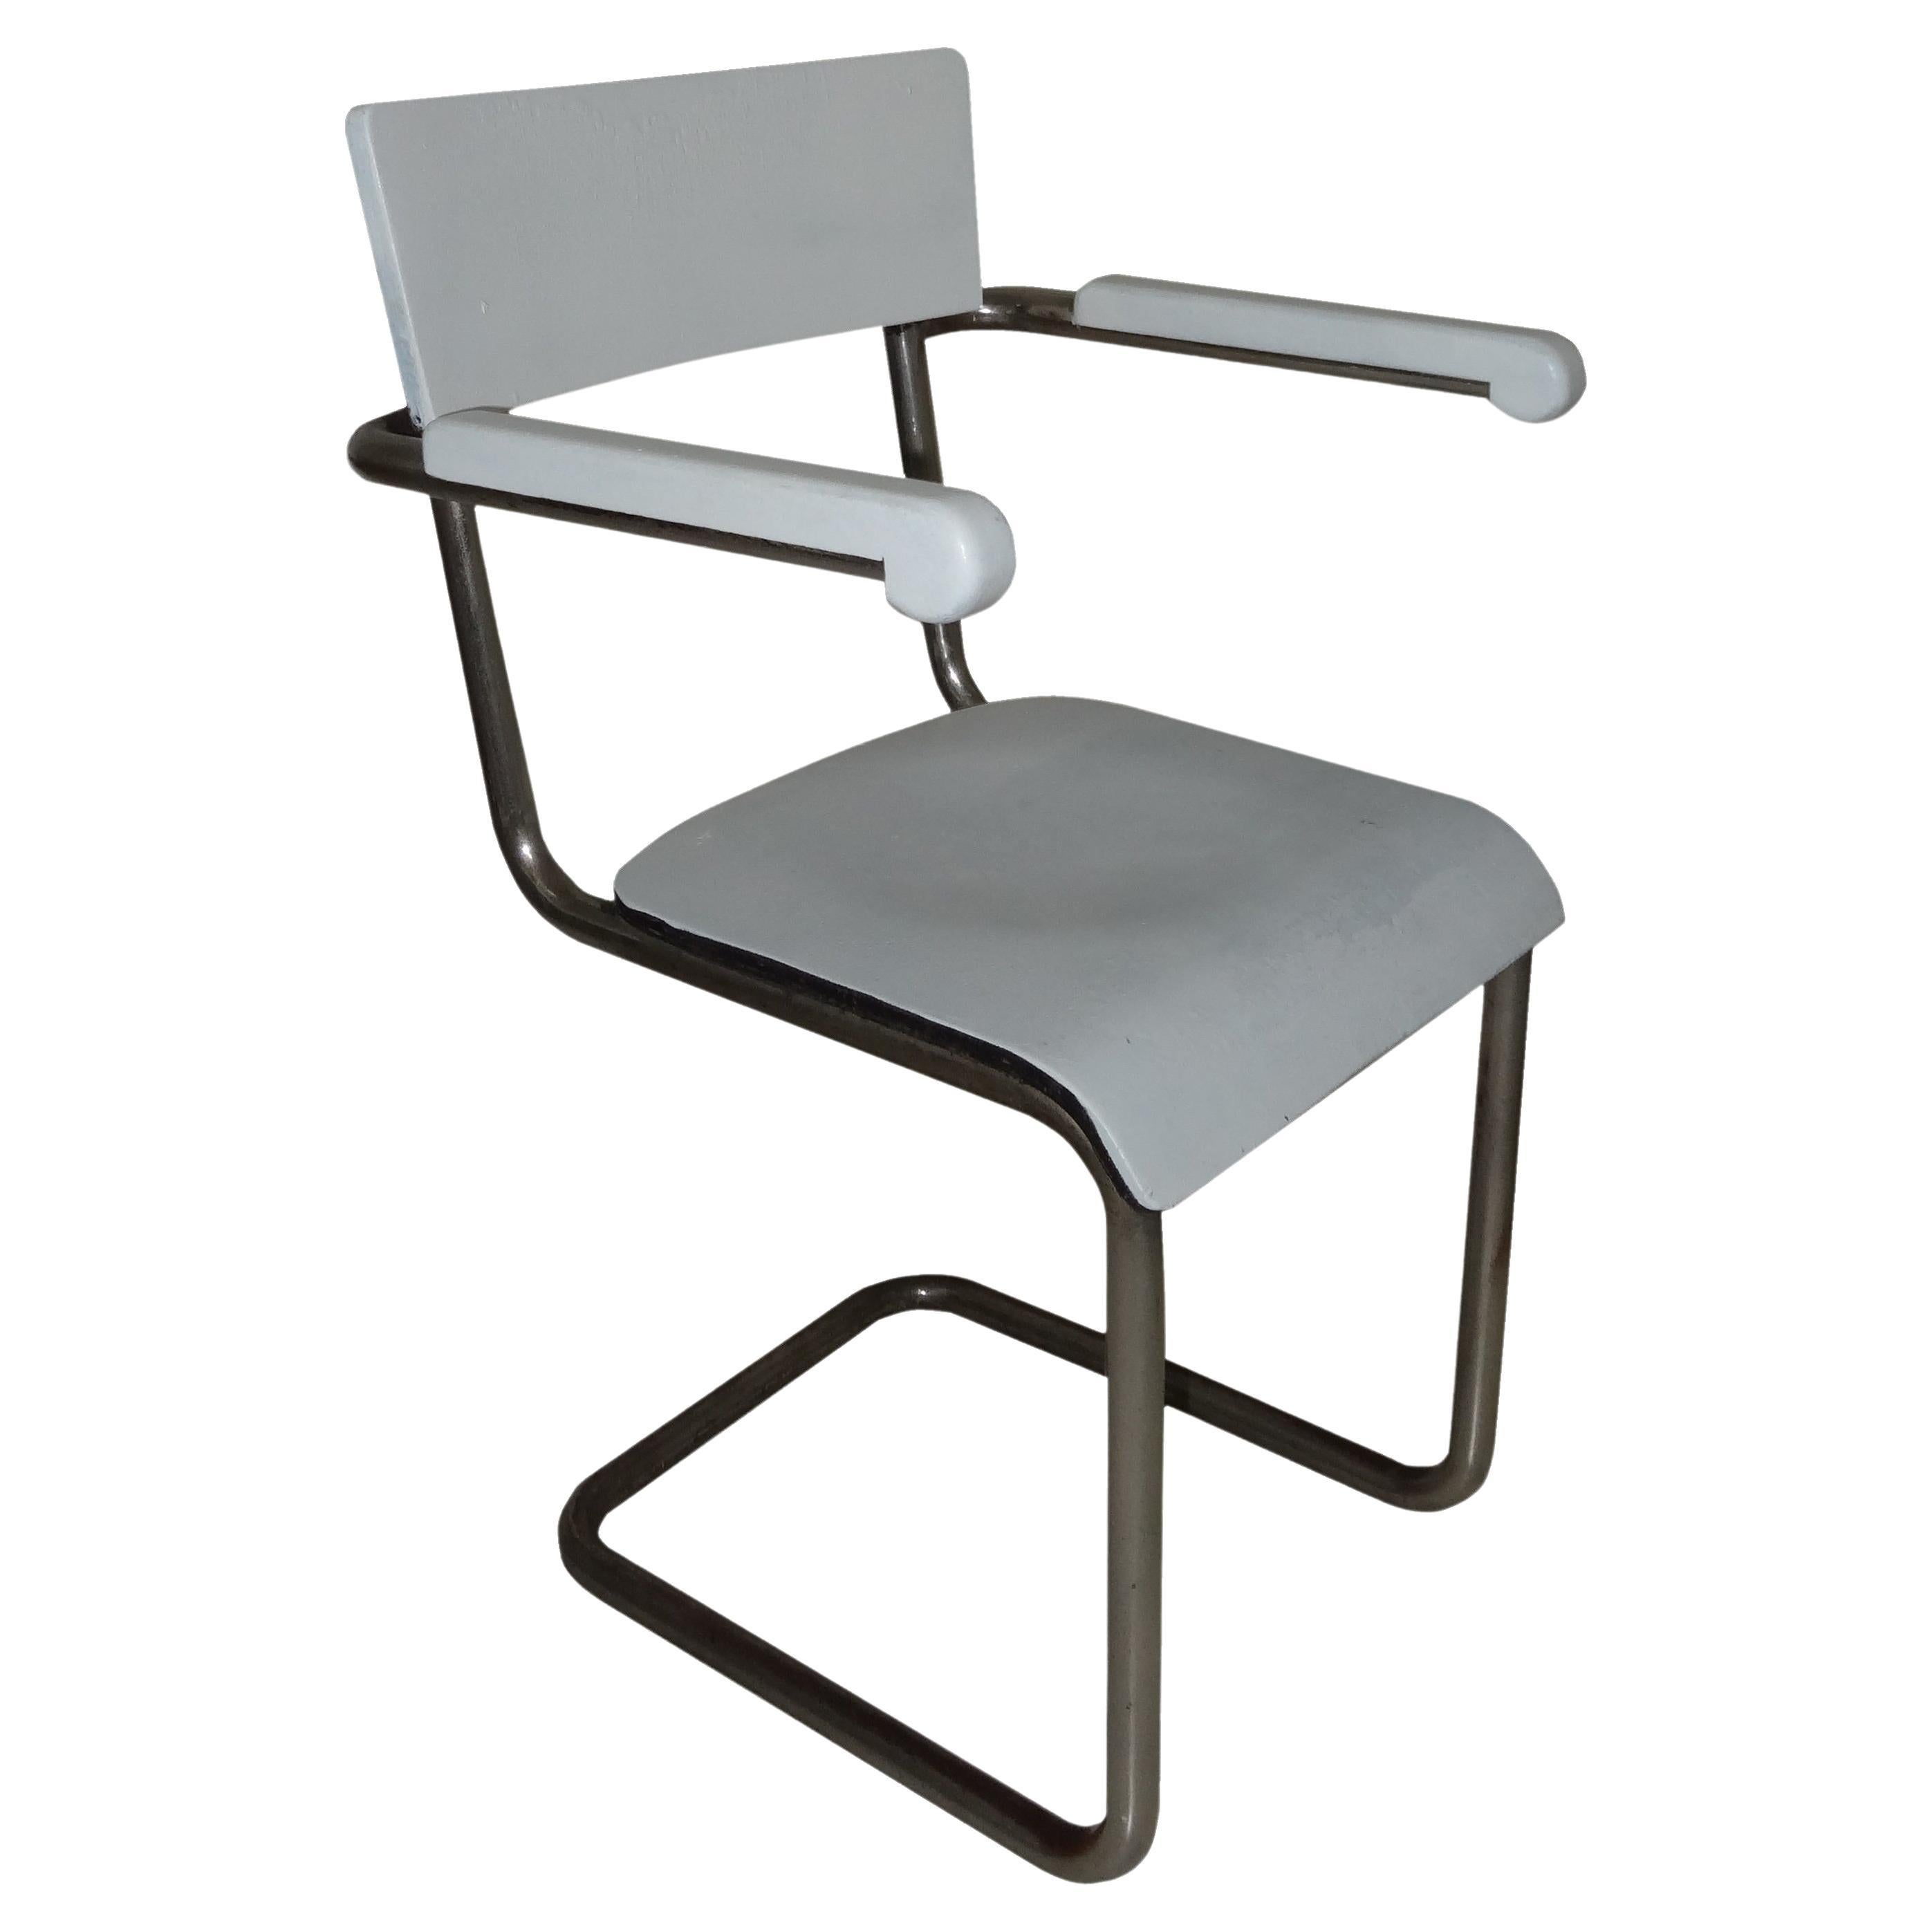 Armchair in Wood and Chrome, Style: Bauhaus, German, 1940